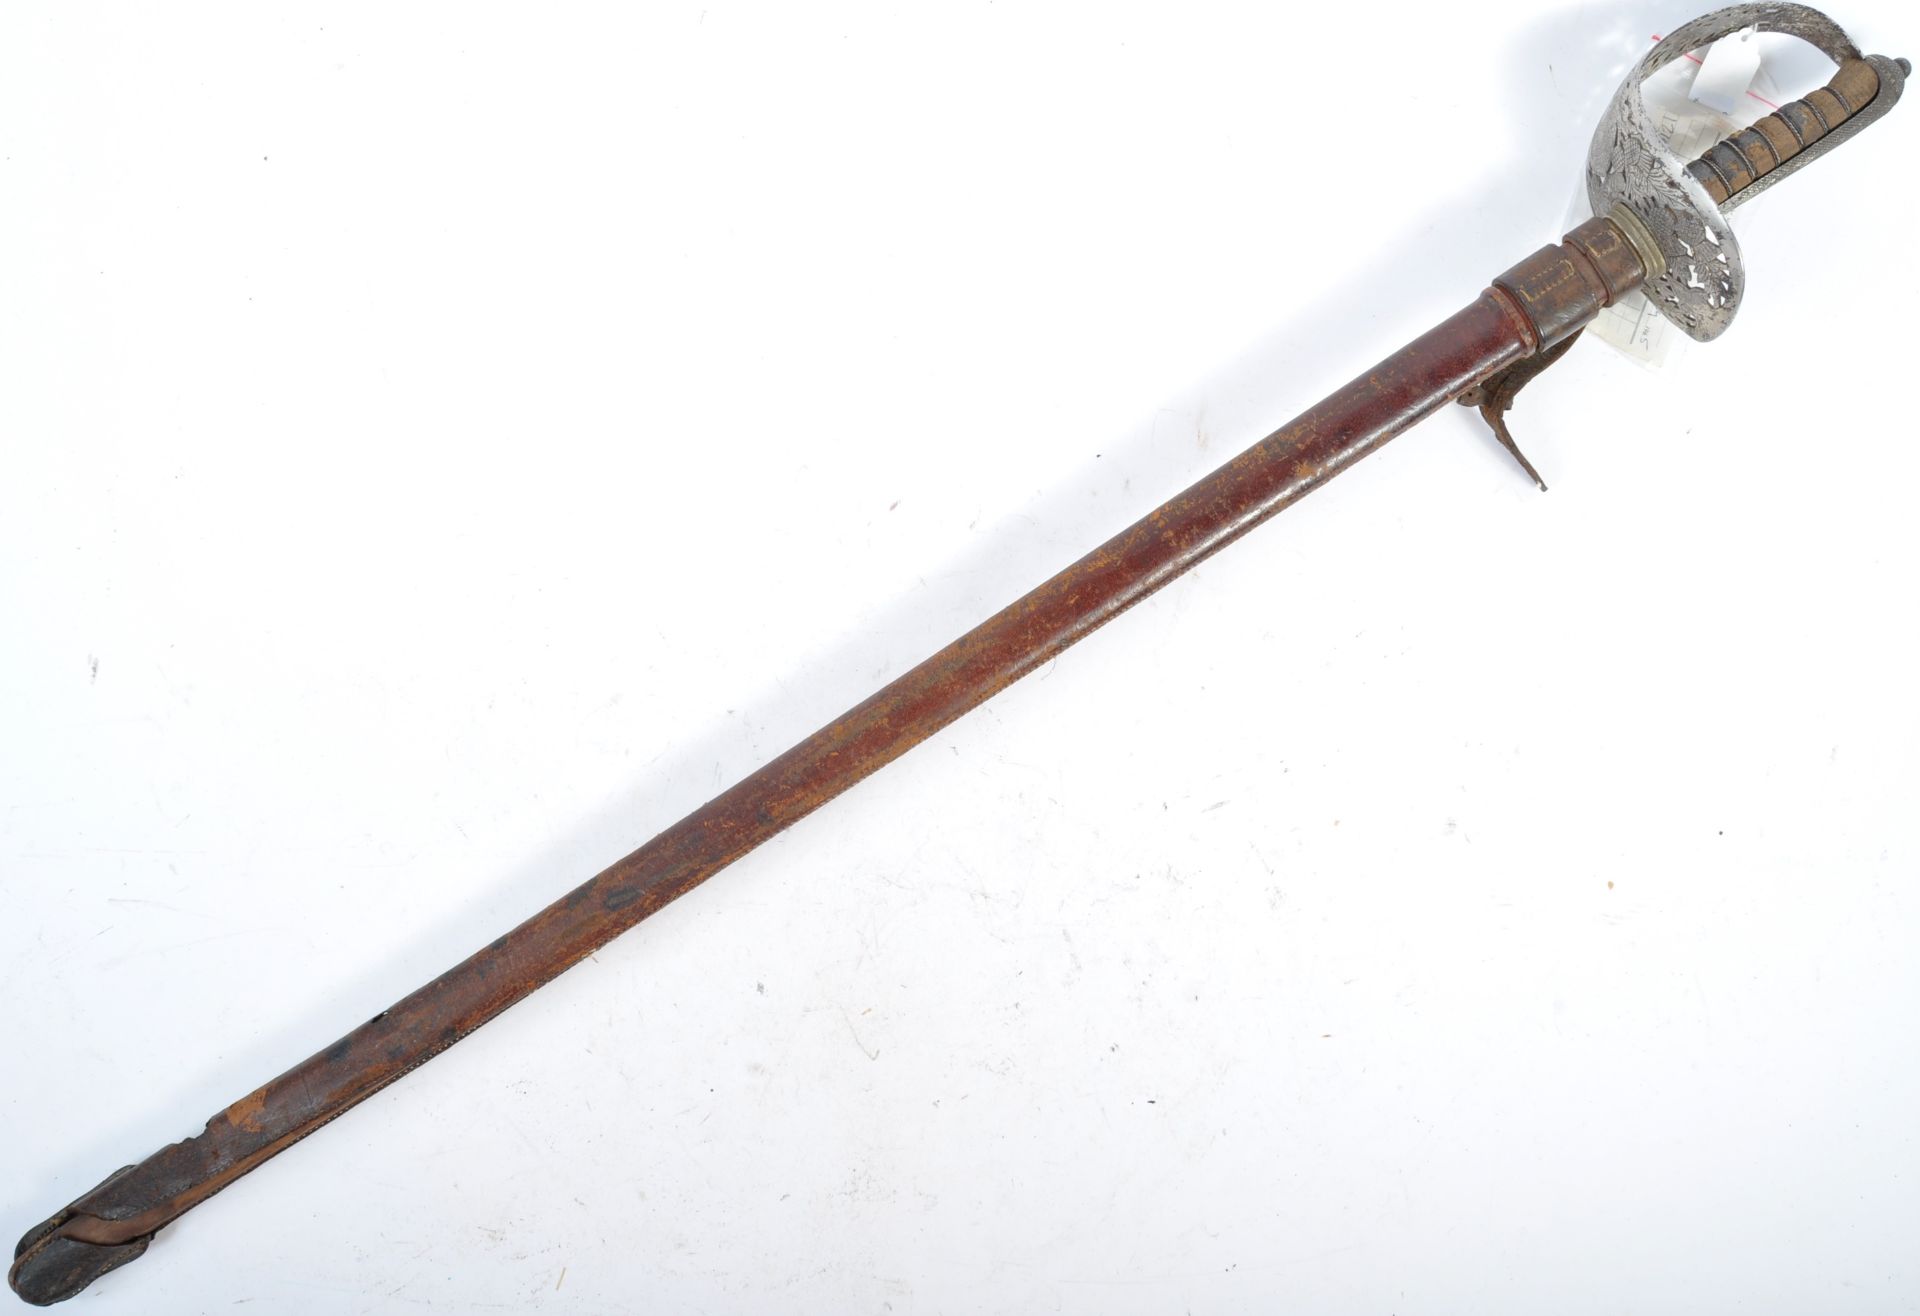 UNUSUAL 19TH CENTURY SCOTTISH OFFICERS SWORD WITH TOLEDO BLADE - Image 7 of 8